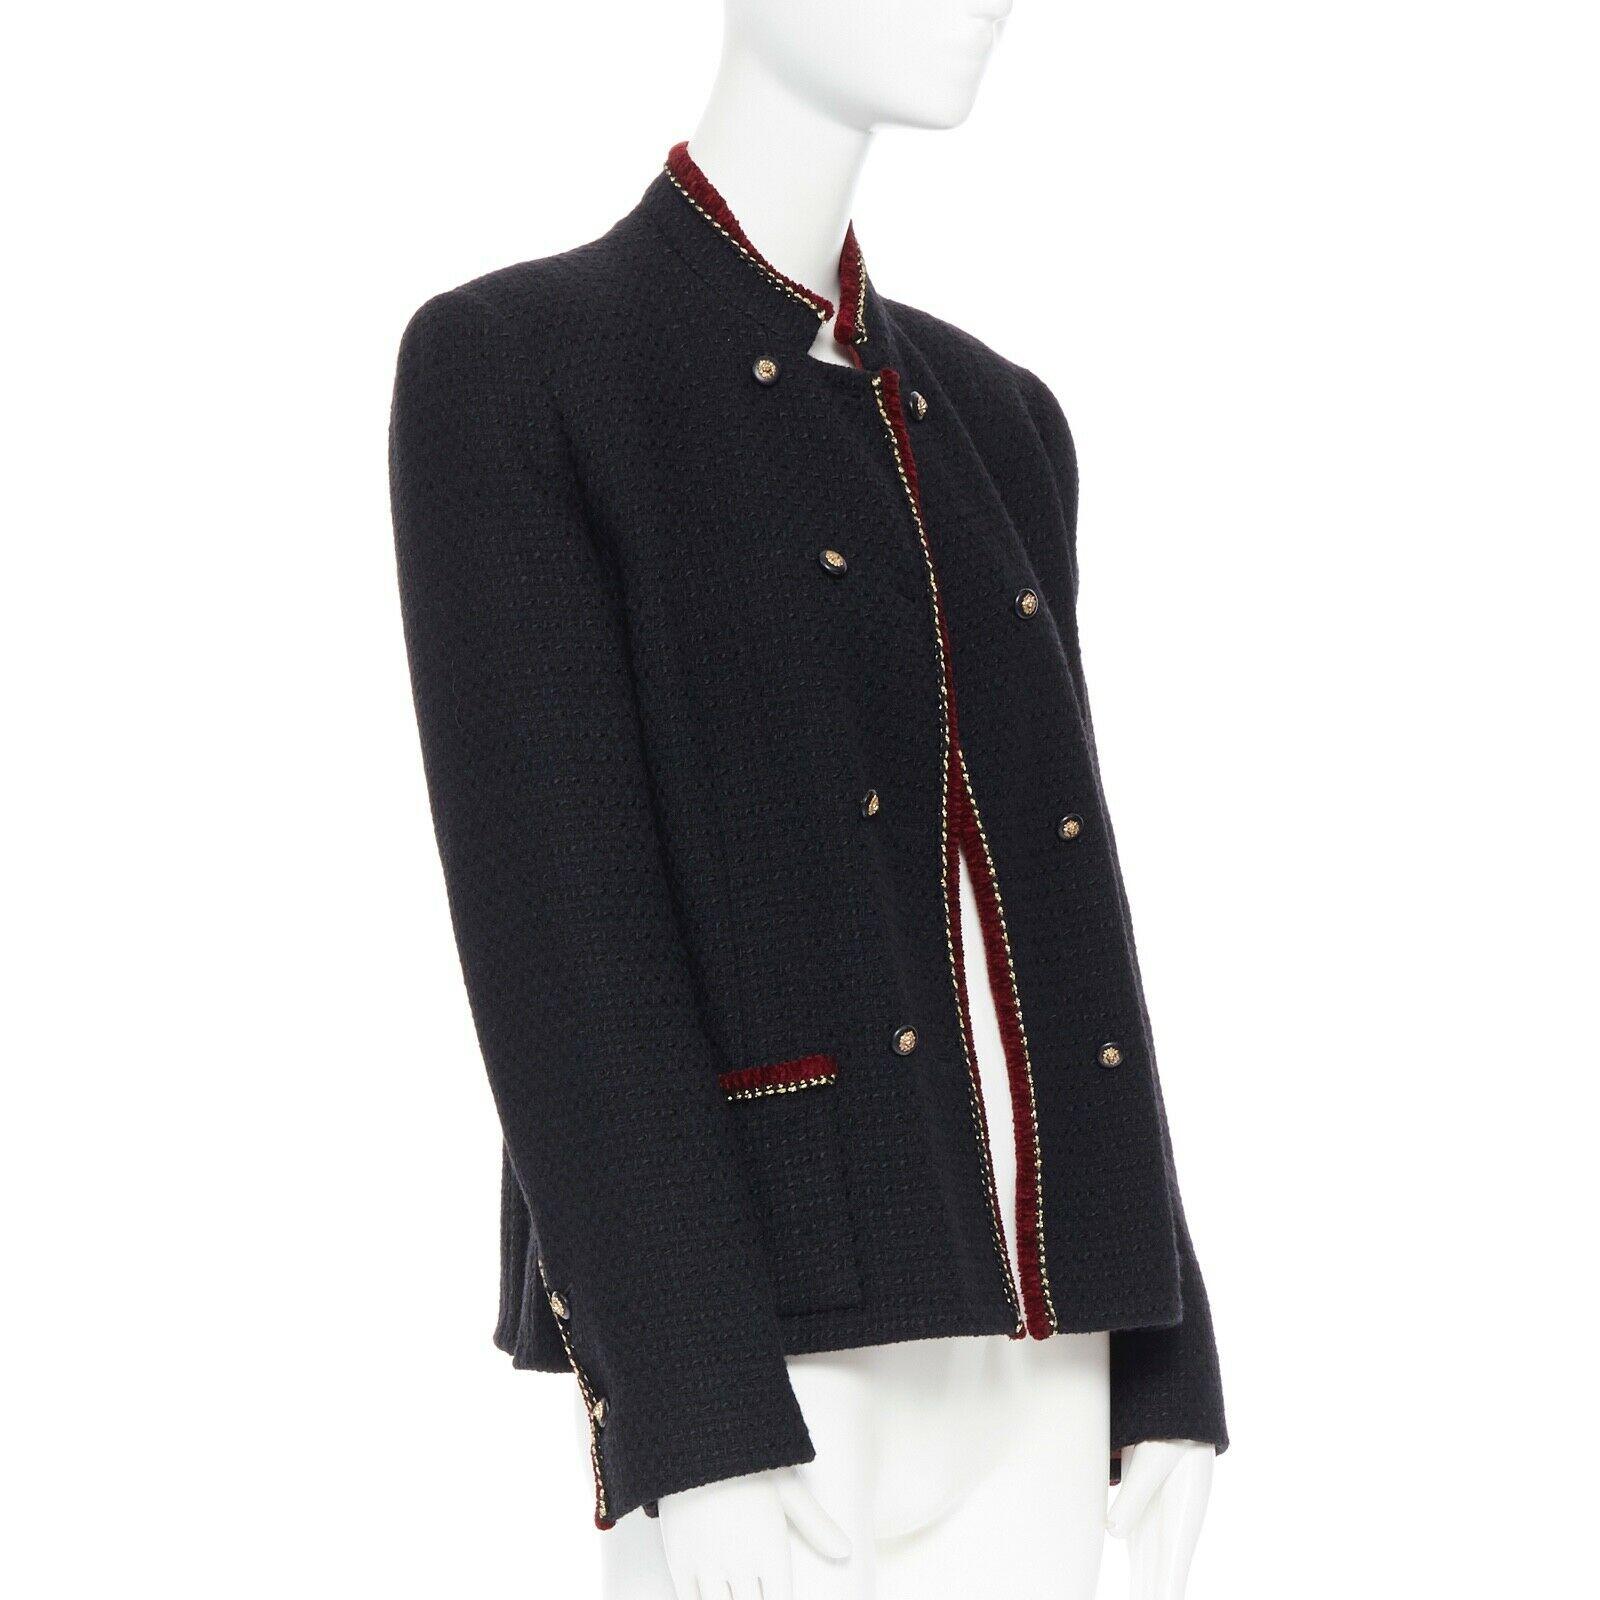 CHANEL Vintage 1970's red gold black tweed lion button double breasted jacket L
Brand: CHANEL
Designer: Karl Lagerfeld
Collection: Circa 1970s, after the passing of Mademoiselle Chanel and before the enthronement of Karl Lagerfeld, the House of